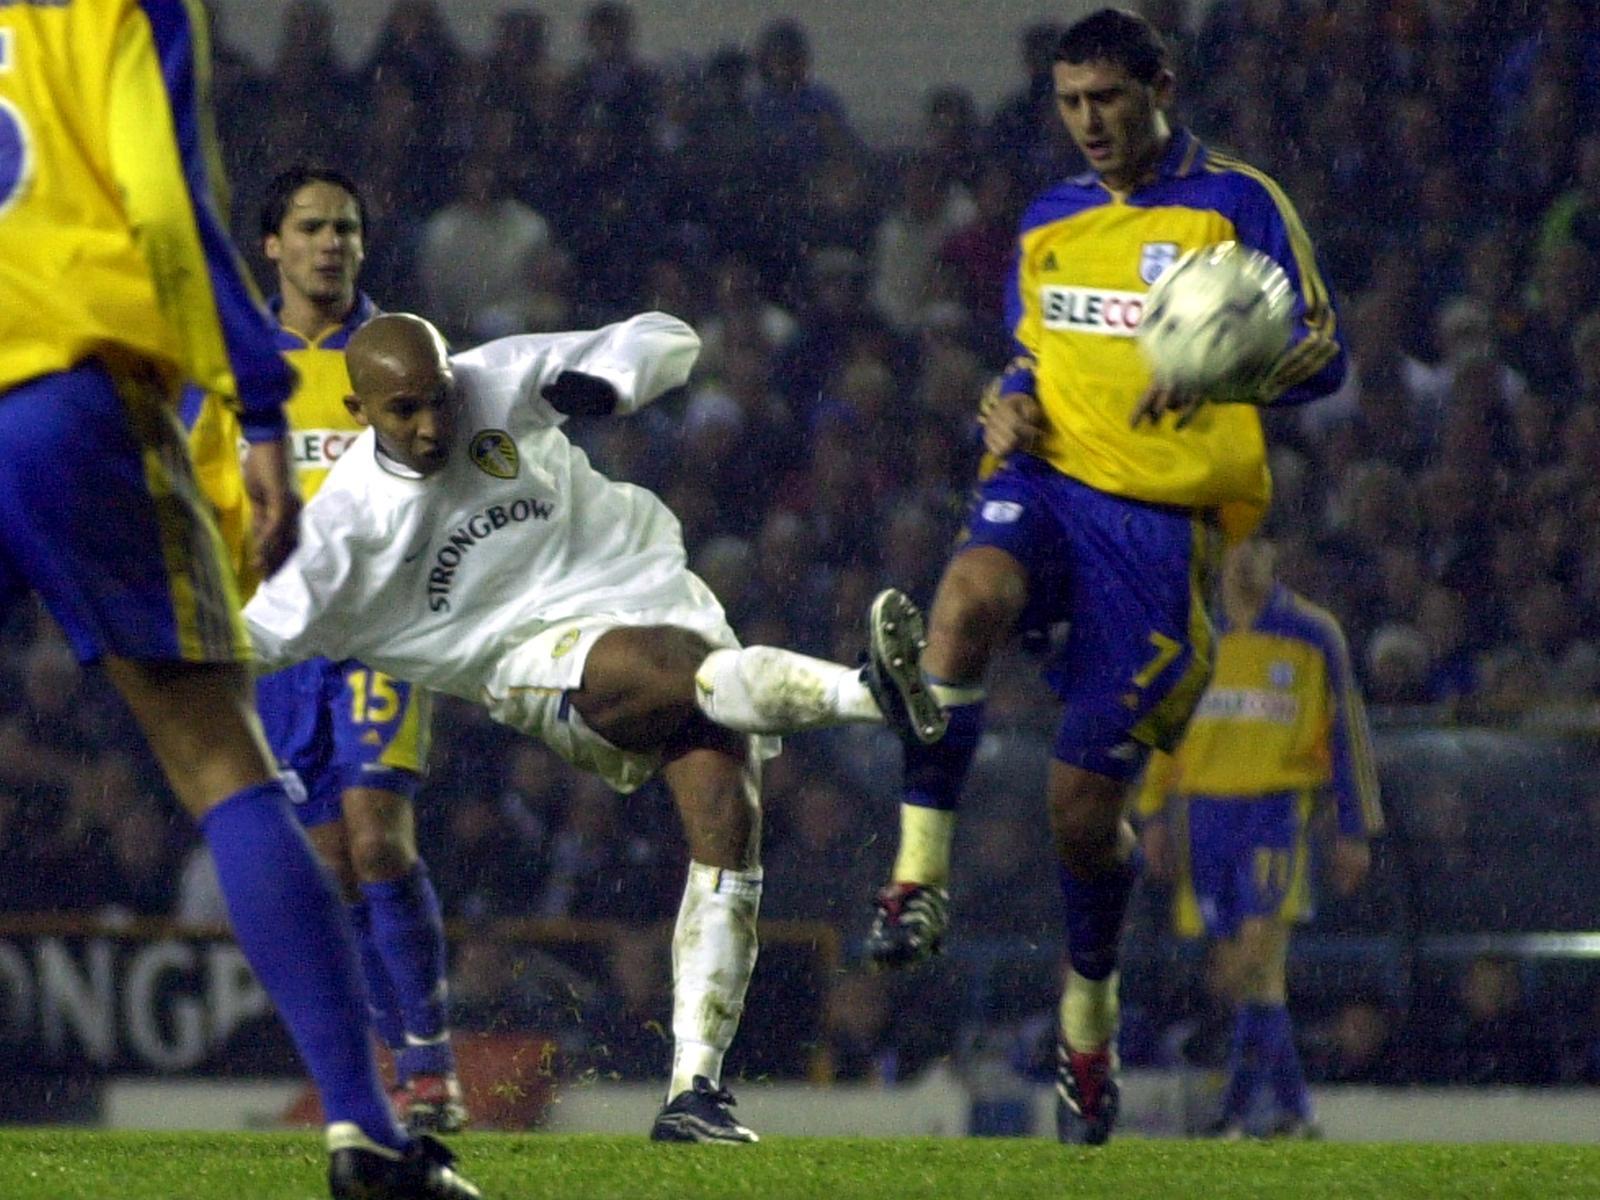 Kewell's 19th-minute, 70-yard surge and shot was easily the highlight of a dull contest Leeds should have won with ease. Instead they ended up drawing against poor opposition and progress courtesy of their narrow first-leg victory.